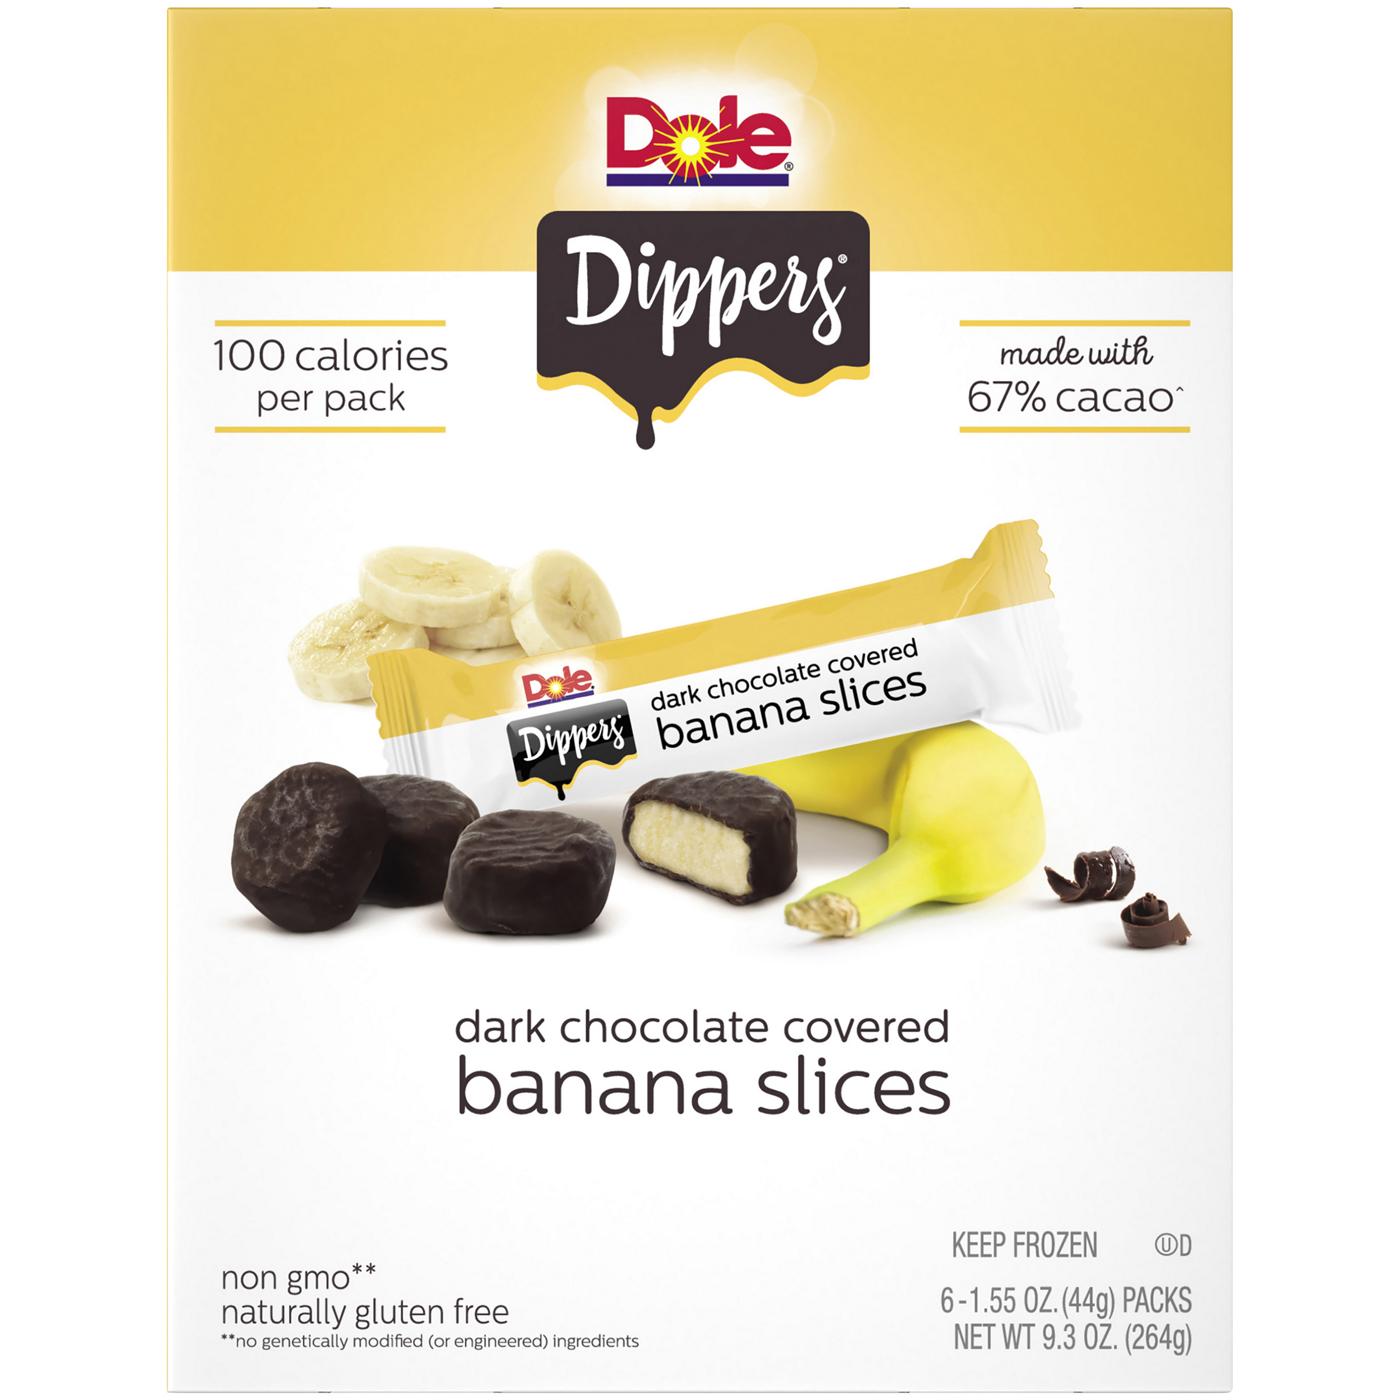 Dole Dippers Dark Chocolate Banana Dippers; image 1 of 3